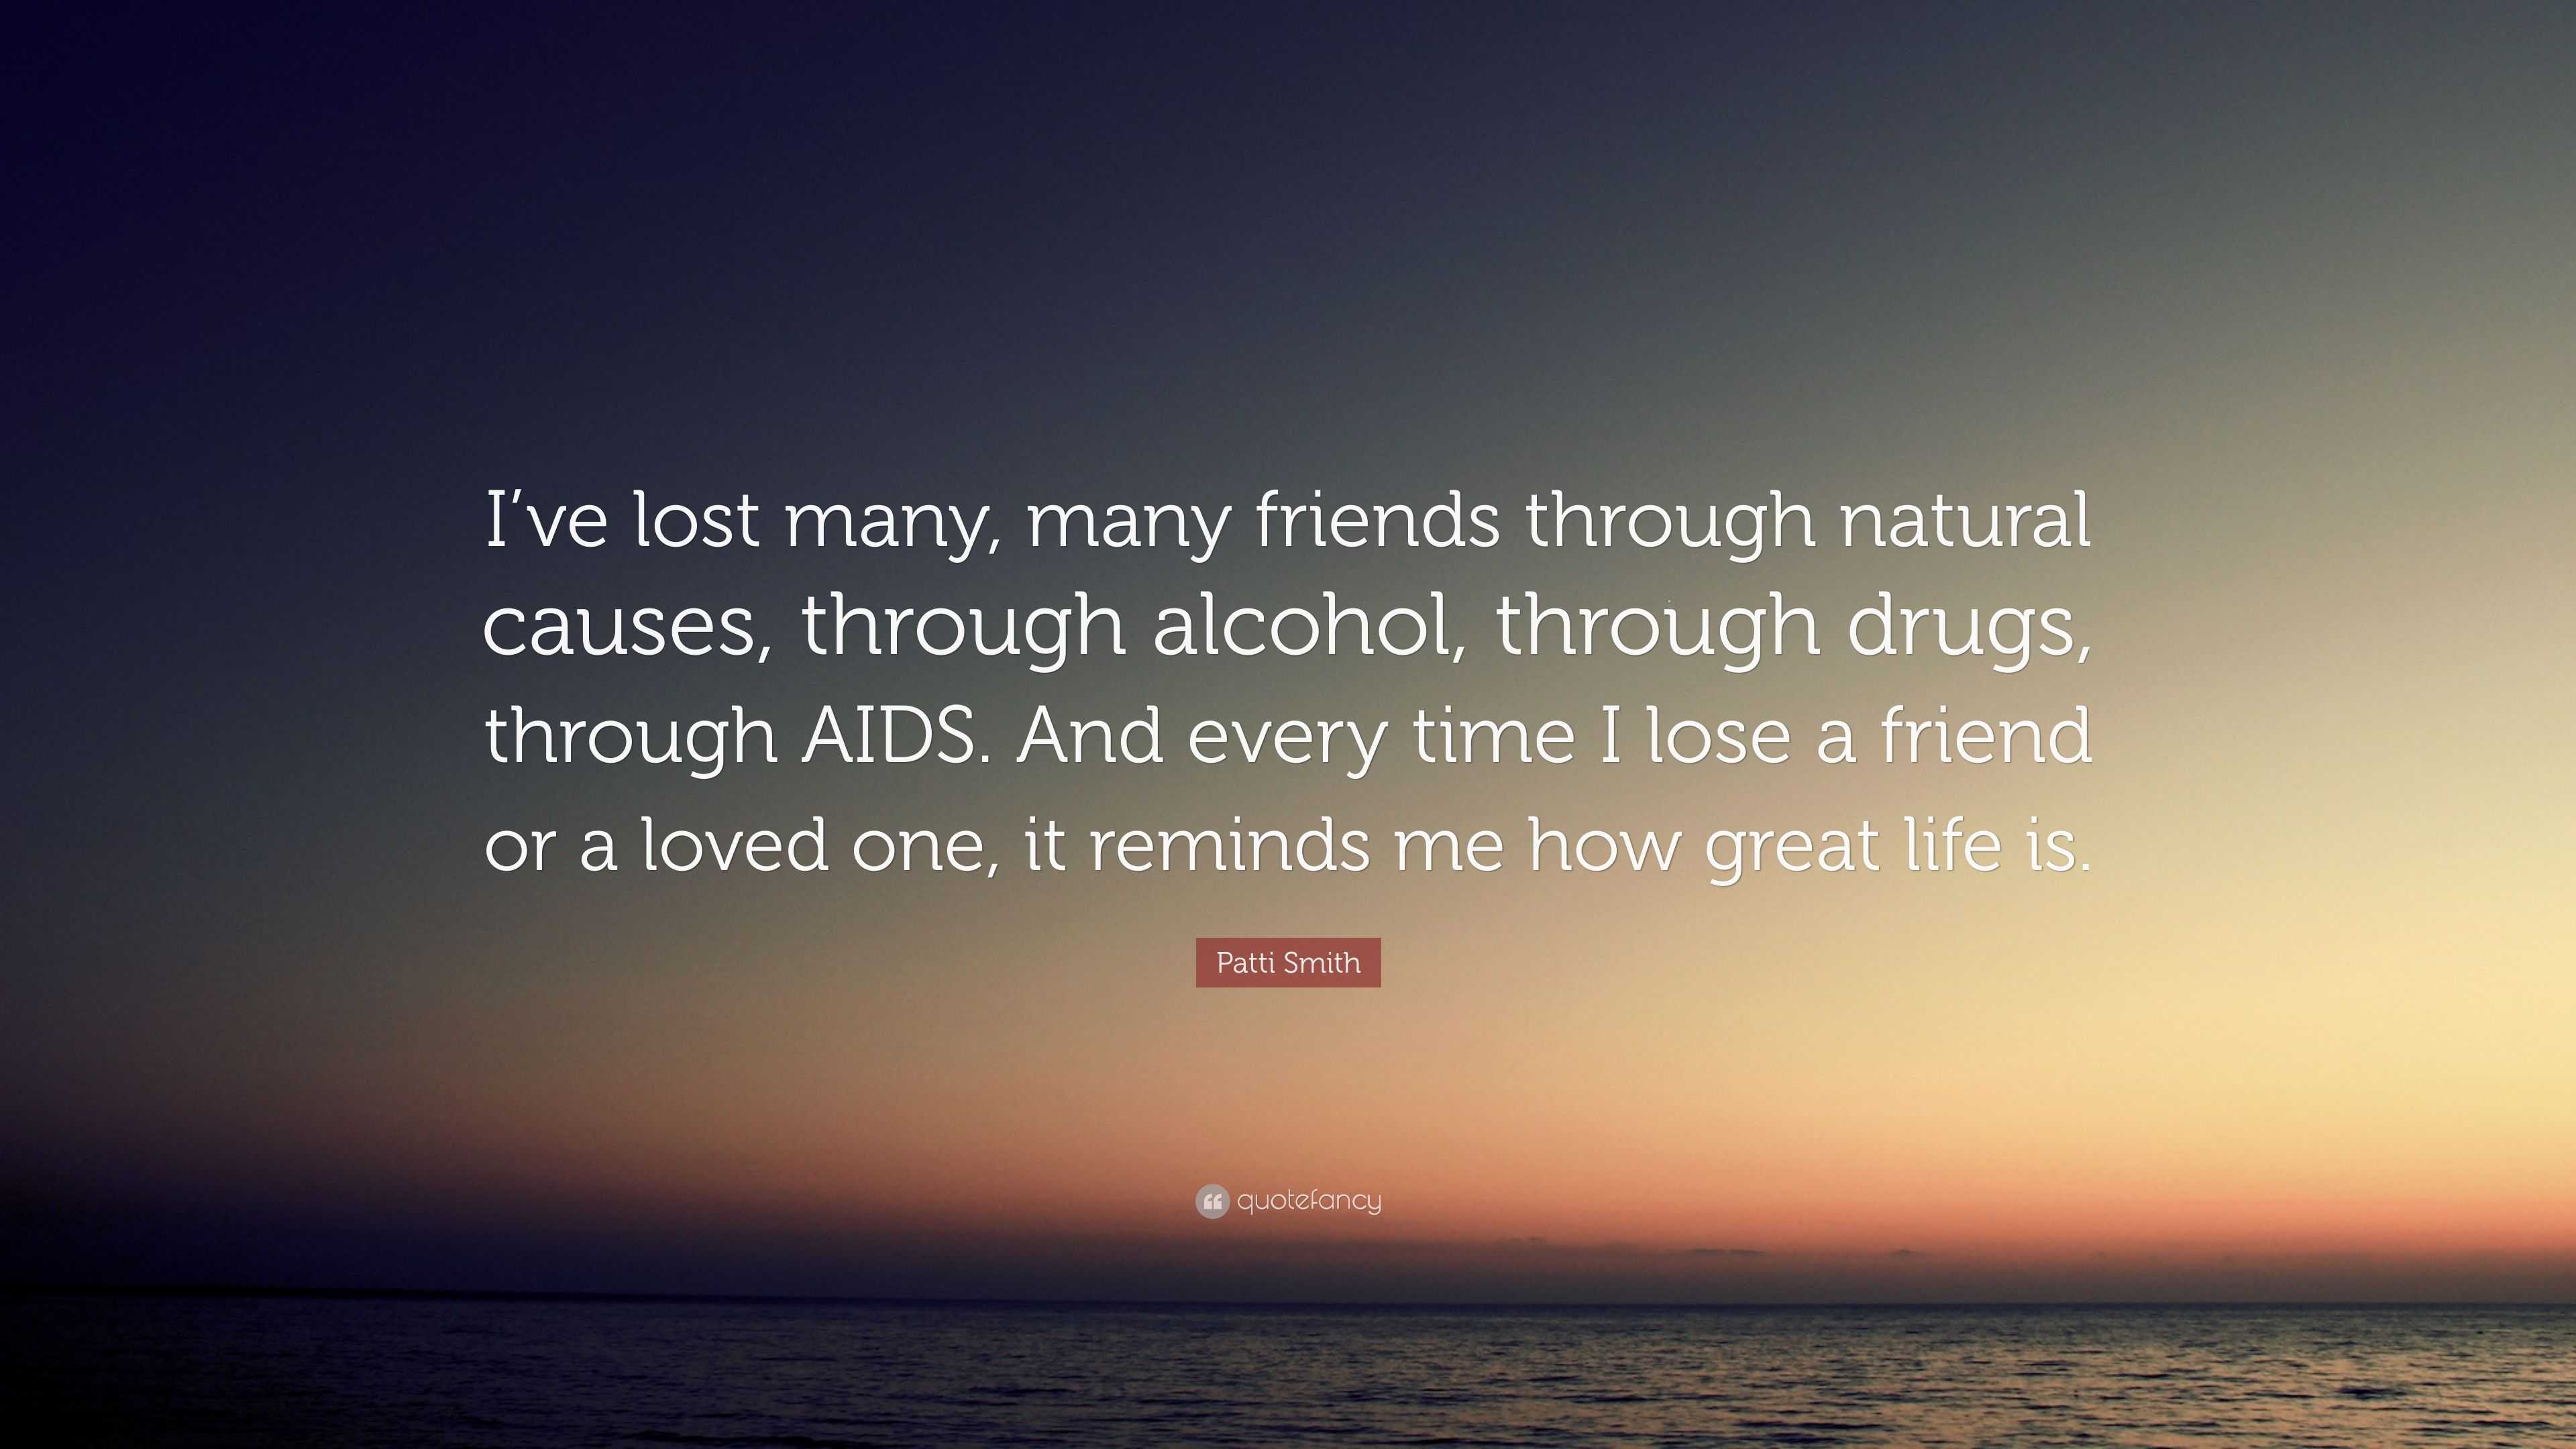 Patti Smith Quote “I ve lost many many friends through natural causes